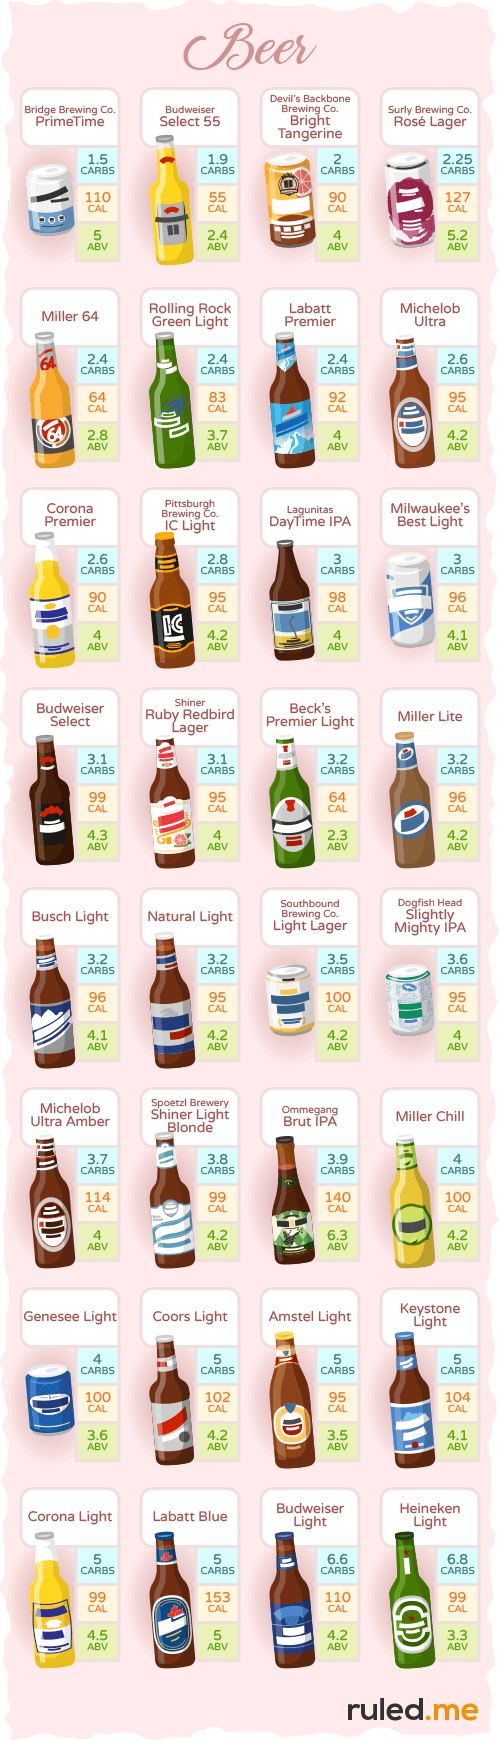 lowest carb beer for the keto diet